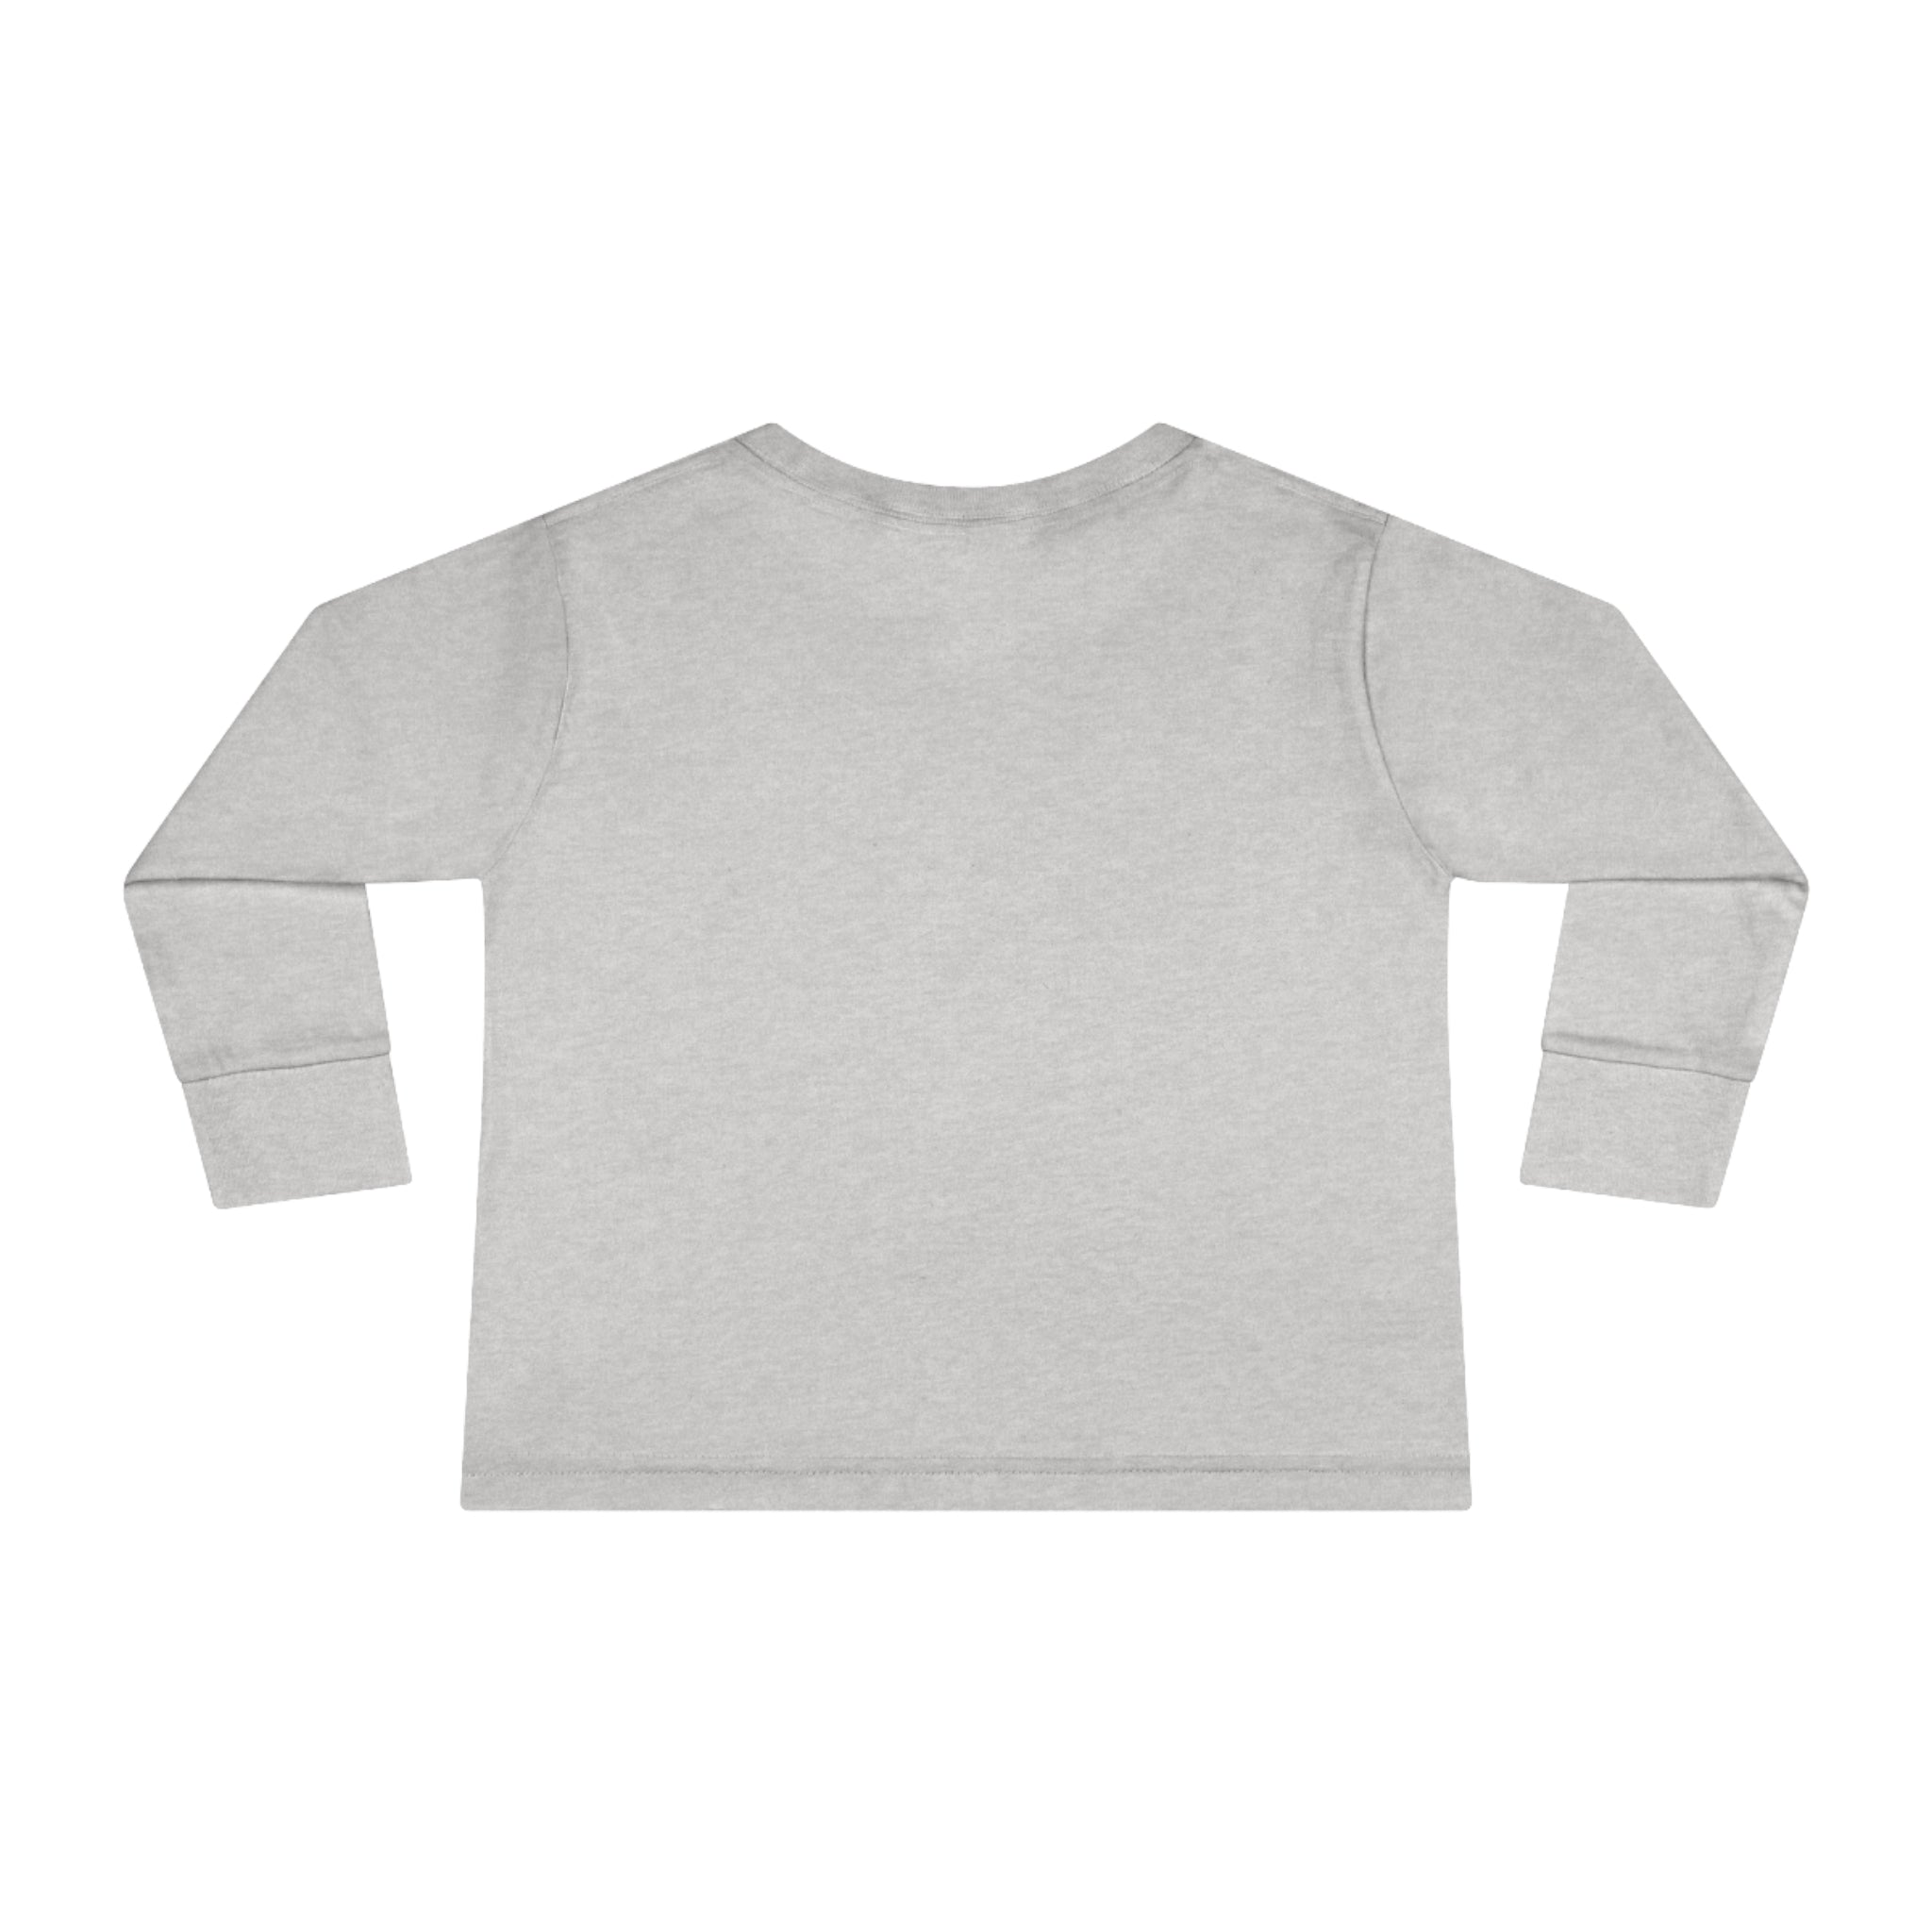 Toddler Long Sleeve Tee - Chicken Chick